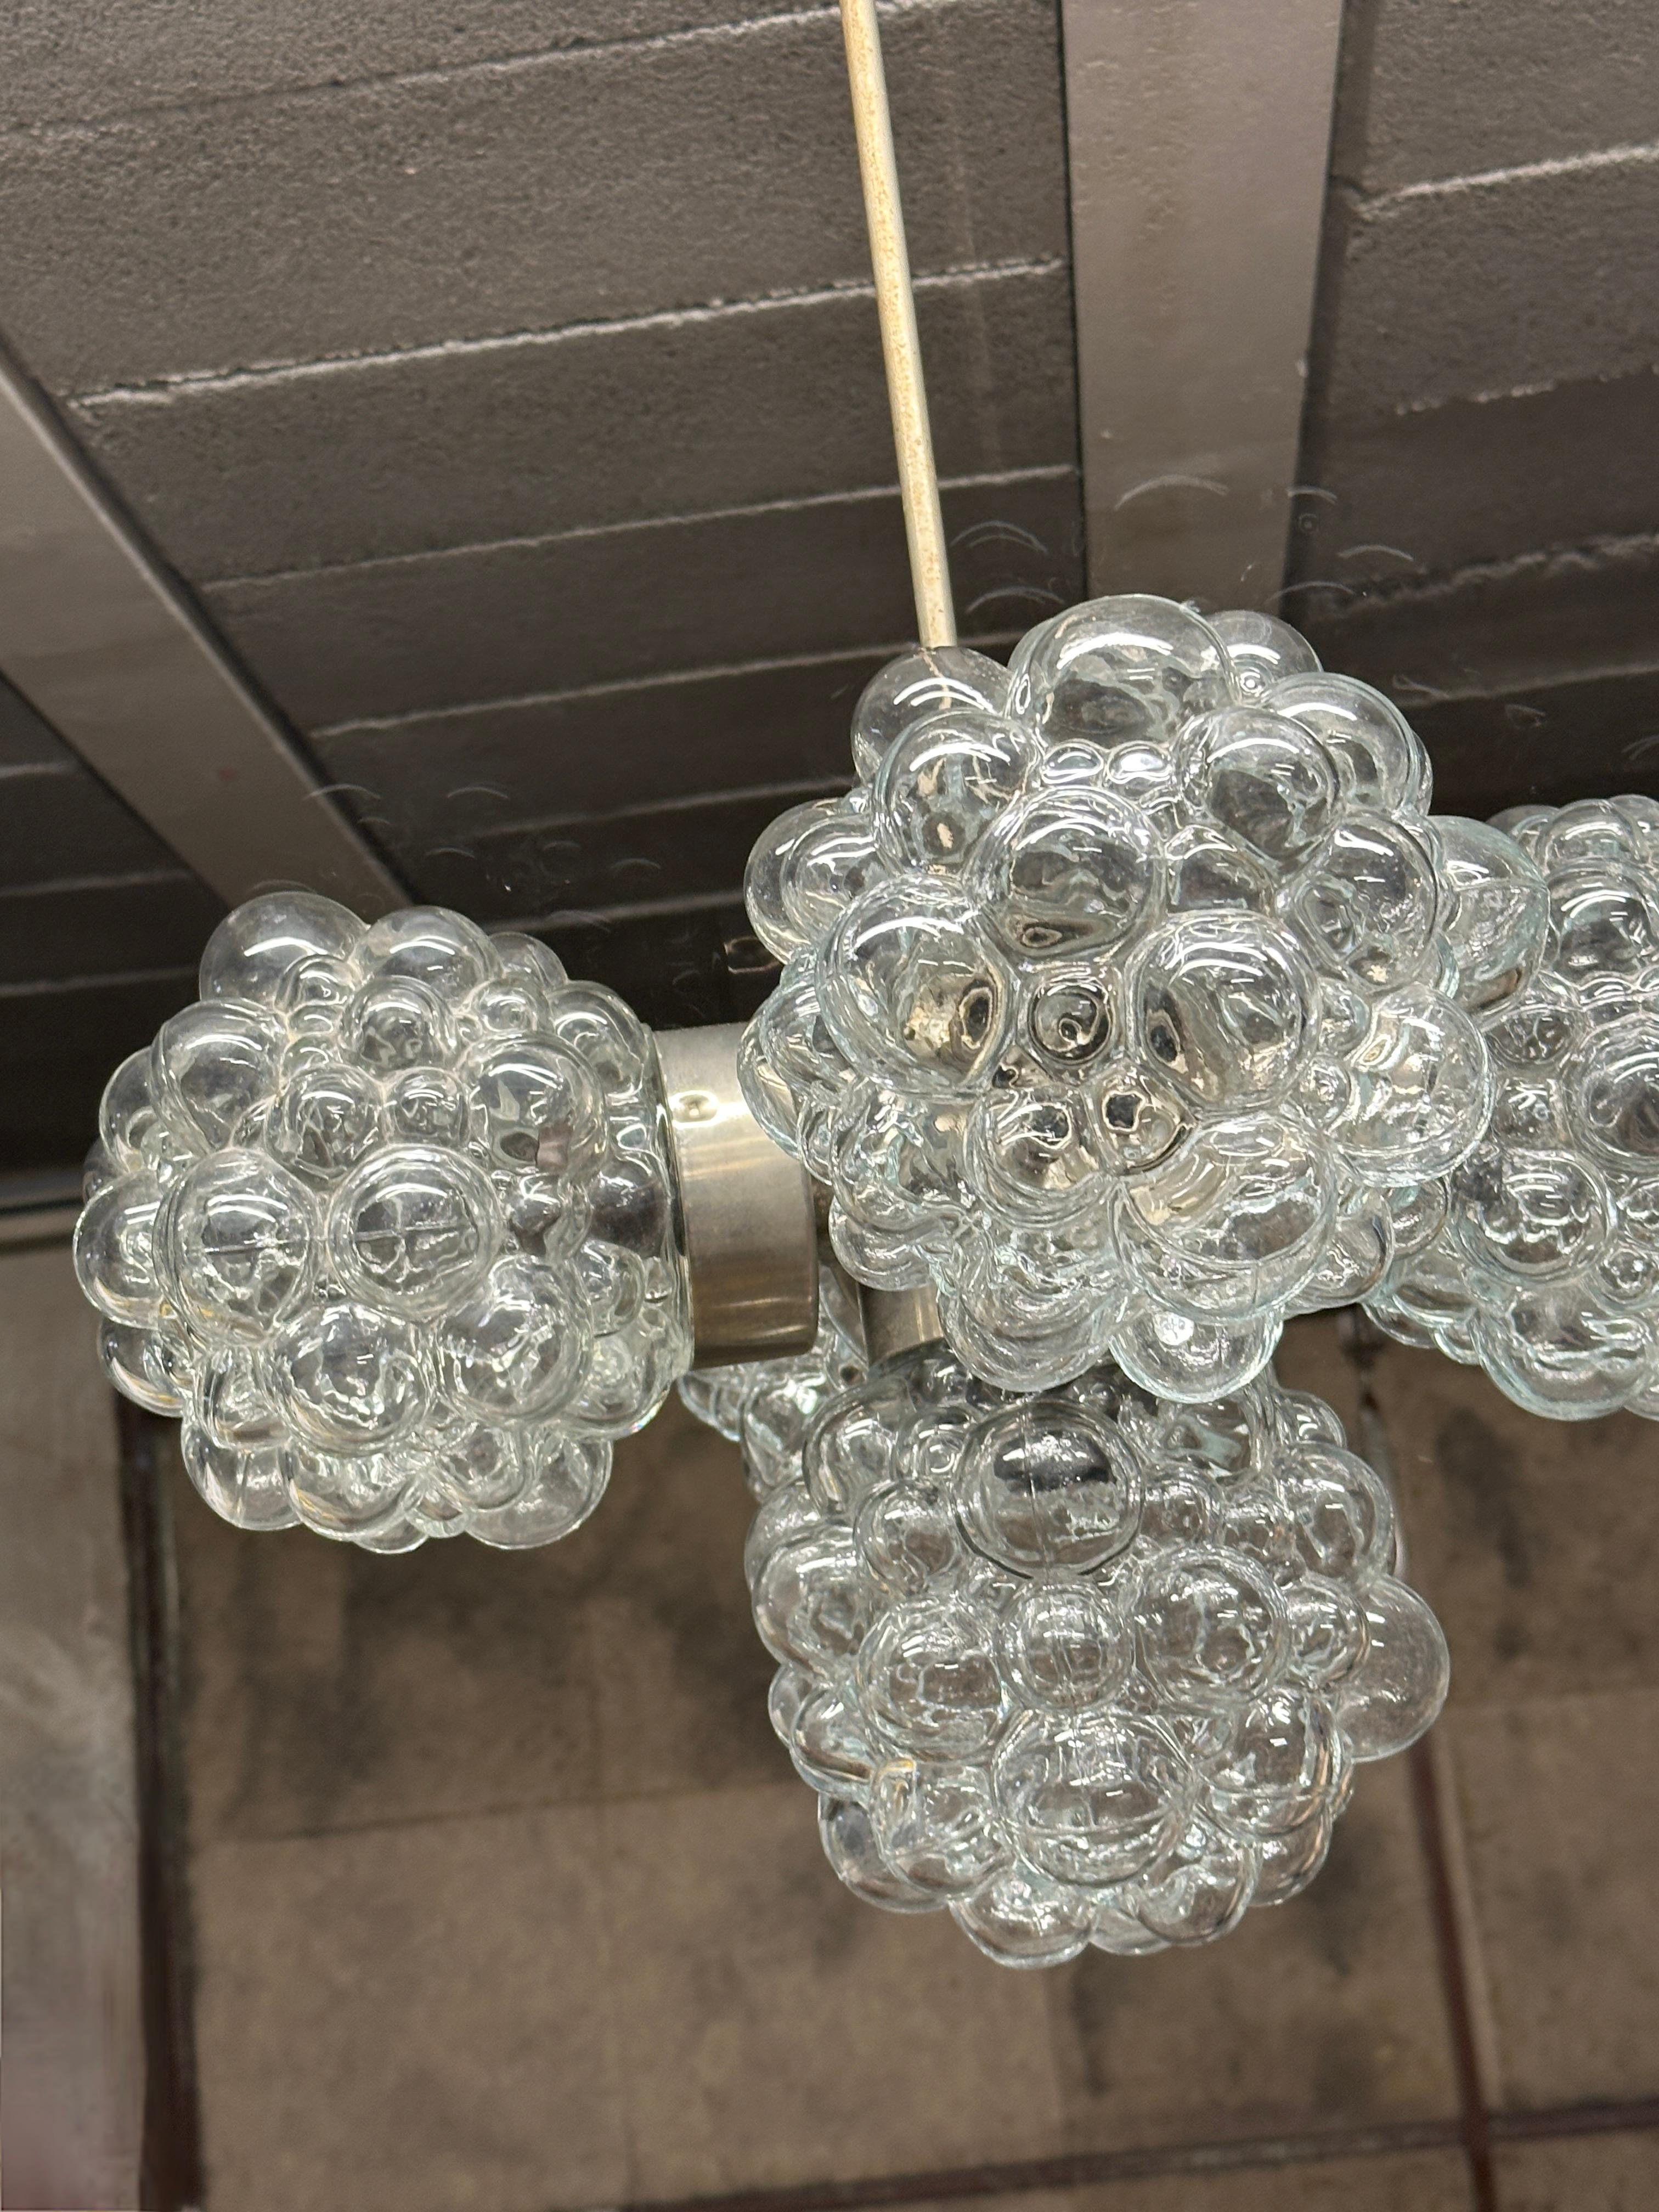 5 Light Bubble Glass Helena Tynell Style Chandelier, Austria 1960s For Sale 3